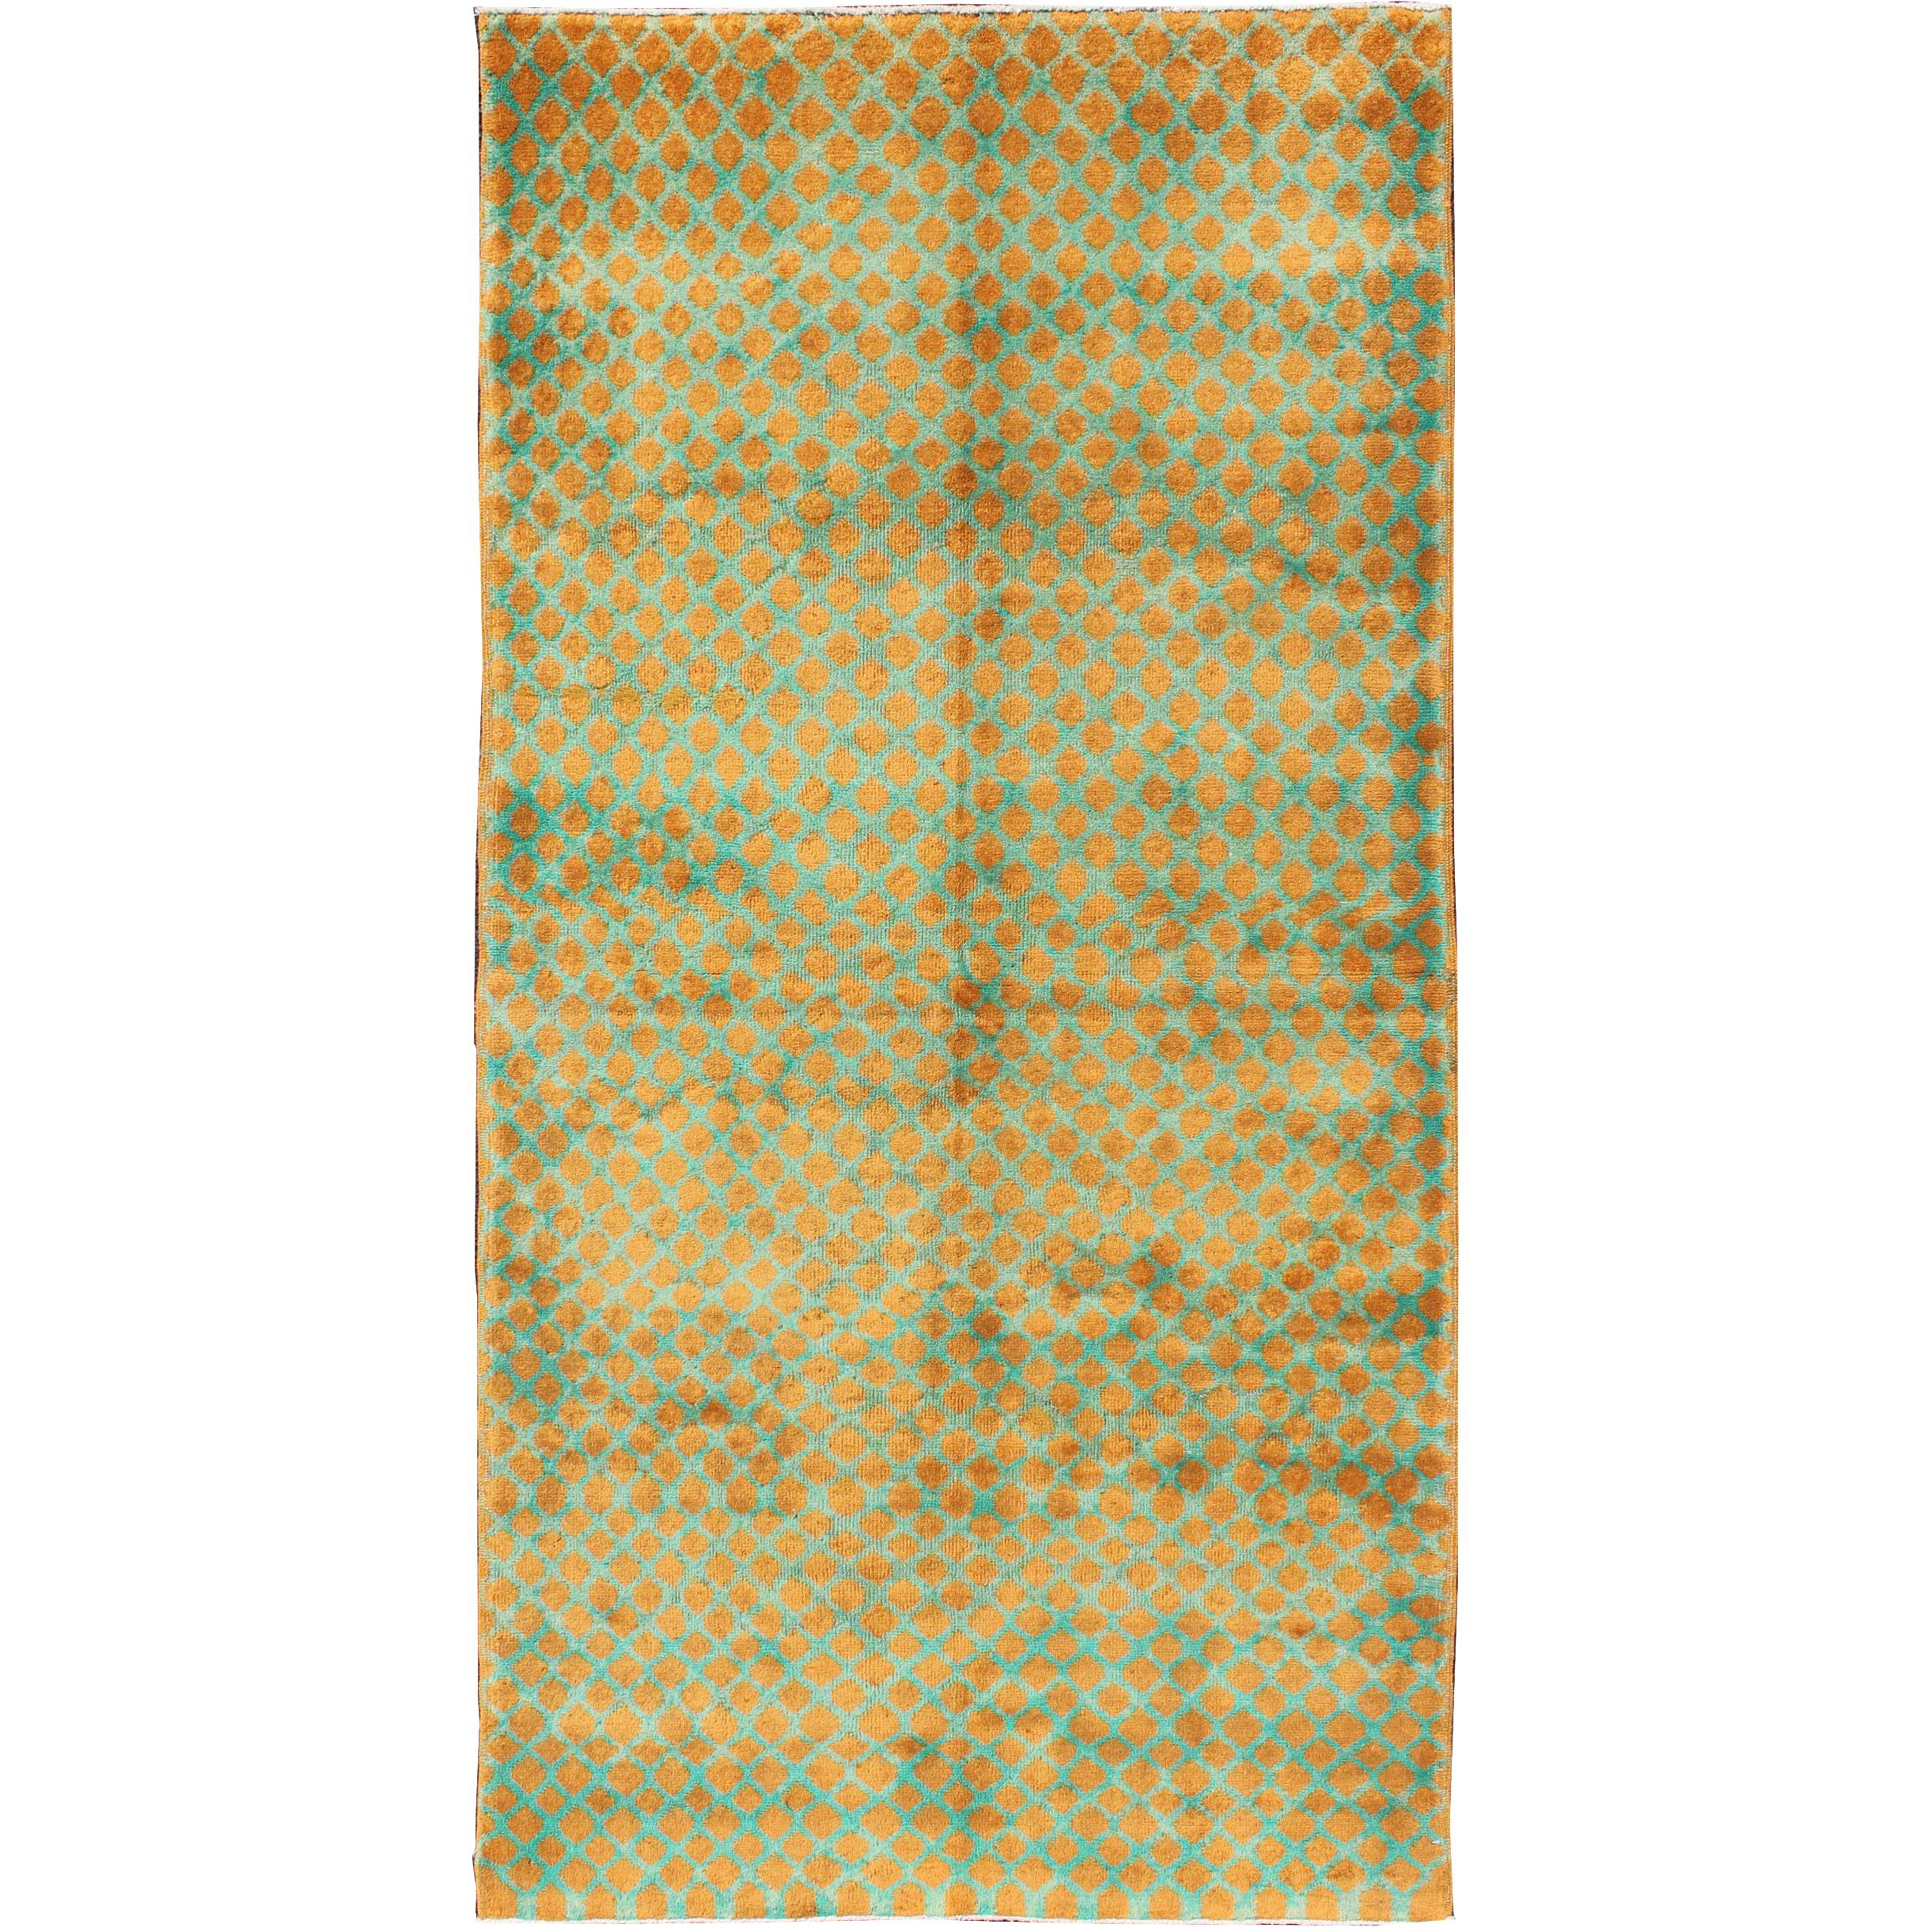 Mid-Century Modern Rug with All-Over Design in Orange and Teal